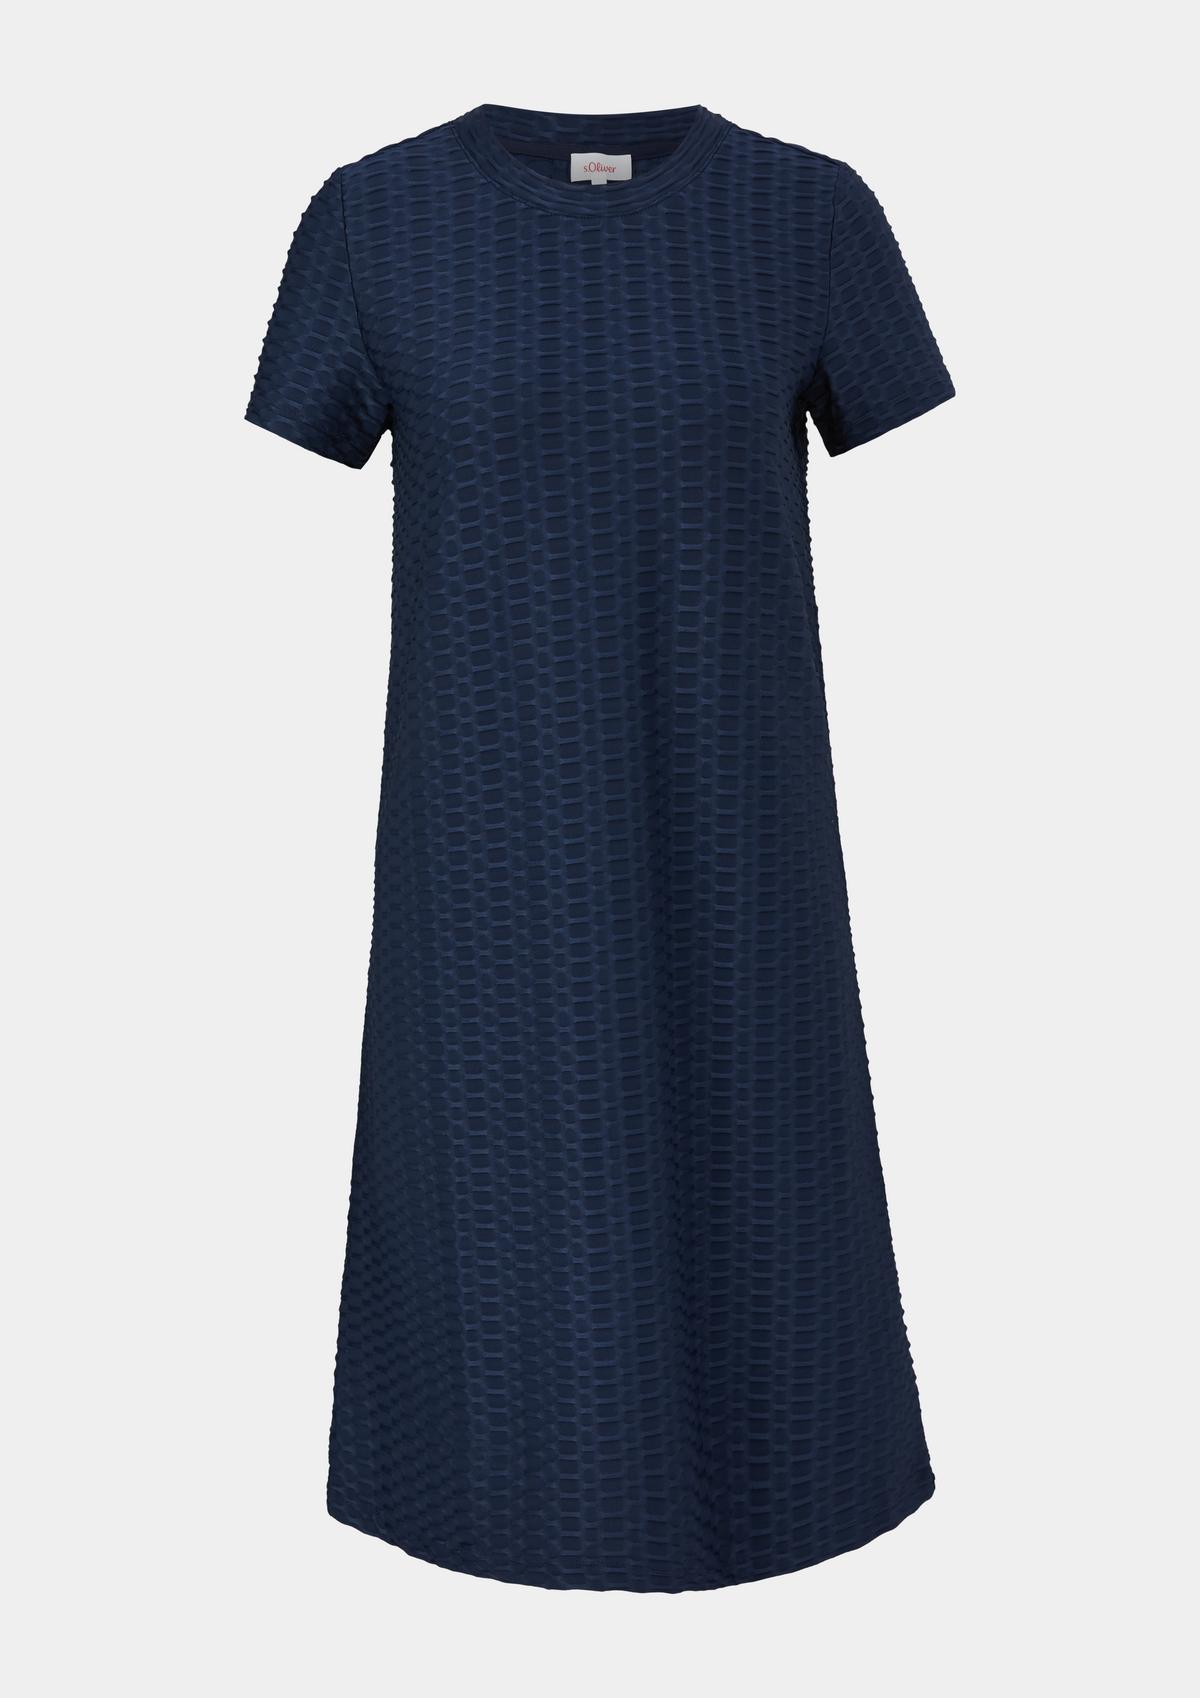 s.Oliver Shirt dress with a textured pattern